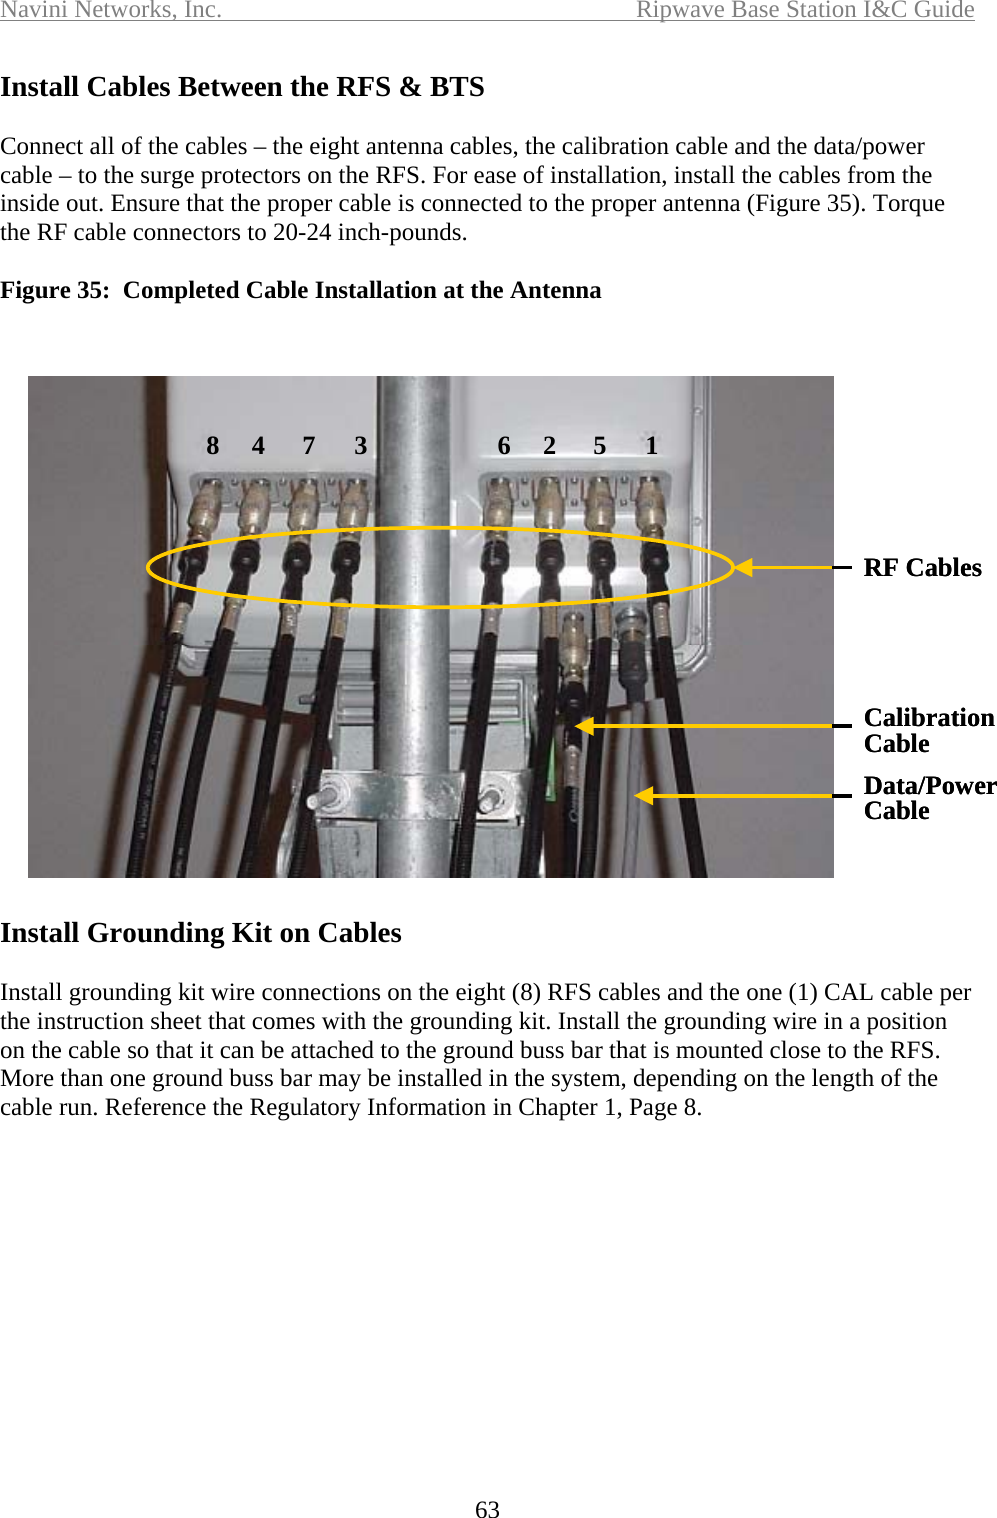 Navini Networks, Inc.  Ripwave Base Station I&amp;C Guide  63 Install Cables Between the RFS &amp; BTS  Connect all of the cables – the eight antenna cables, the calibration cable and the data/power  cable – to the surge protectors on the RFS. For ease of installation, install the cables from the inside out. Ensure that the proper cable is connected to the proper antenna (Figure 35). Torque the RF cable connectors to 20-24 inch-pounds.  Figure 35:  Completed Cable Installation at the Antenna    Install Grounding Kit on Cables  Install grounding kit wire connections on the eight (8) RFS cables and the one (1) CAL cable per the instruction sheet that comes with the grounding kit. Install the grounding wire in a position on the cable so that it can be attached to the ground buss bar that is mounted close to the RFS. More than one ground buss bar may be installed in the system, depending on the length of the cable run. Reference the Regulatory Information in Chapter 1, Page 8. 62 5 184 7 3CalibrationCableData/PowerCableRF Cables62 5 184 7 3CalibrationCableData/PowerCableRF Cables